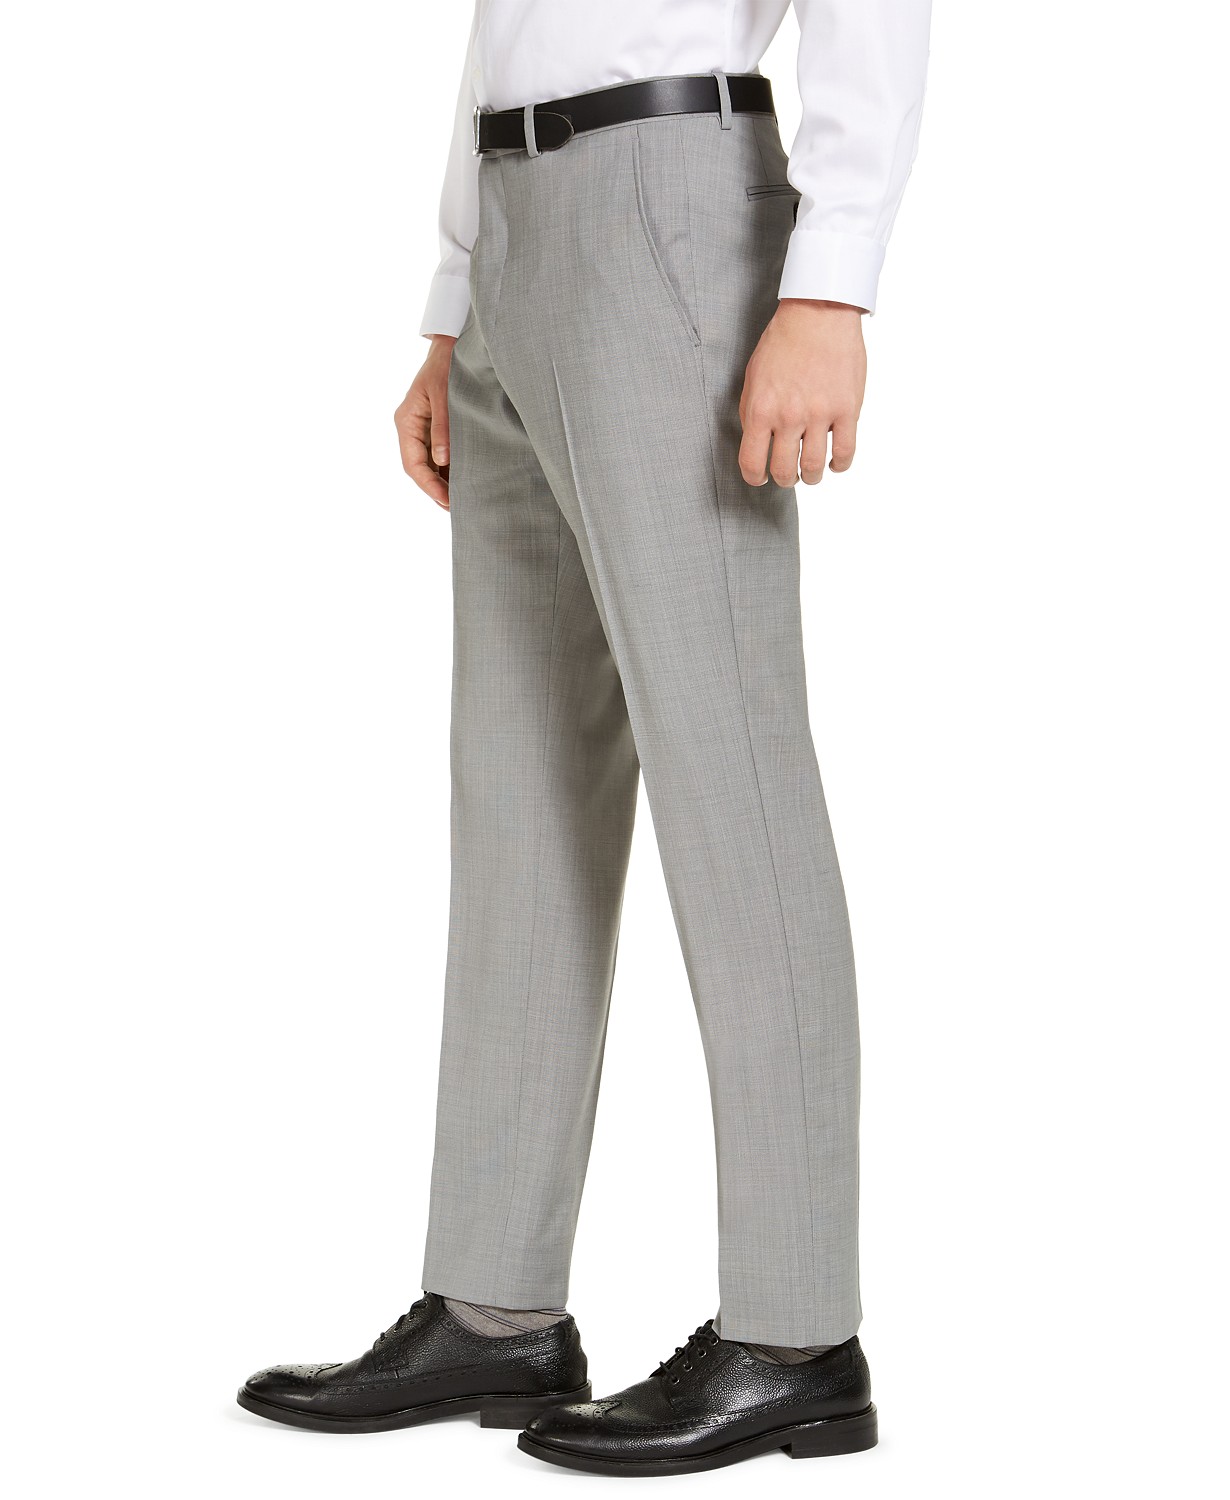 www.couturepoint.com-armani-exchange-mens-grey-wool-blend-slim-fit-suit-separate-pants